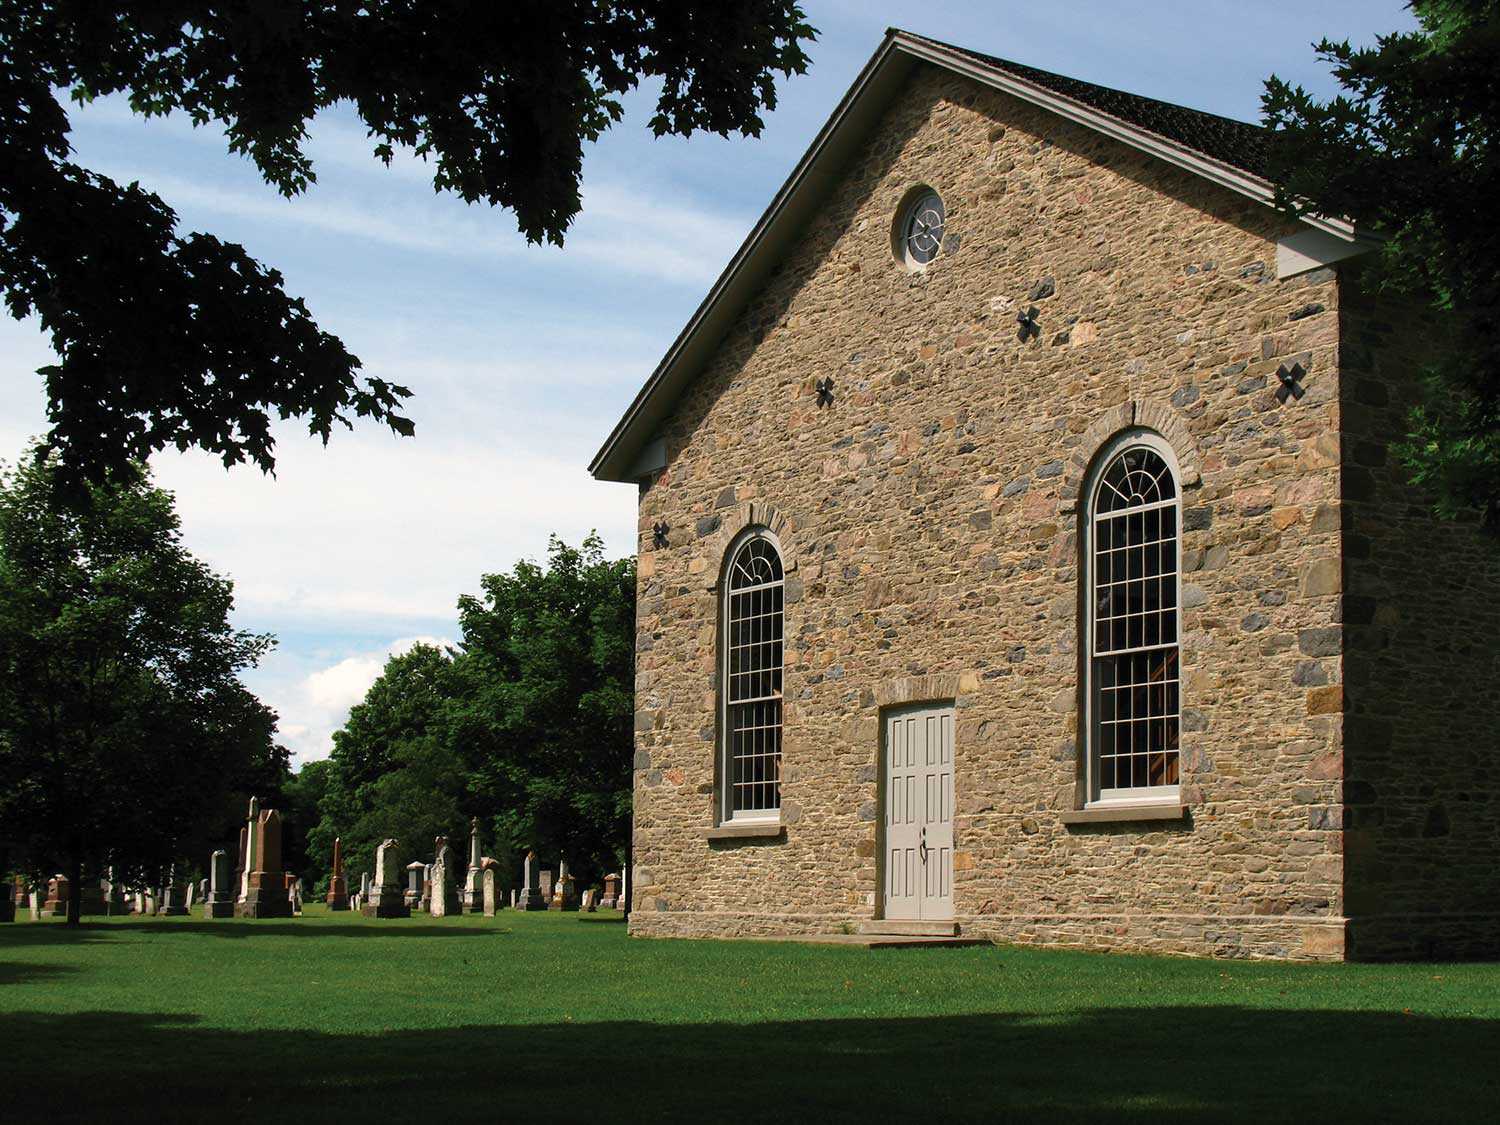 Beaverton’s Old Stone Church benefits from a dedicated group of stewards